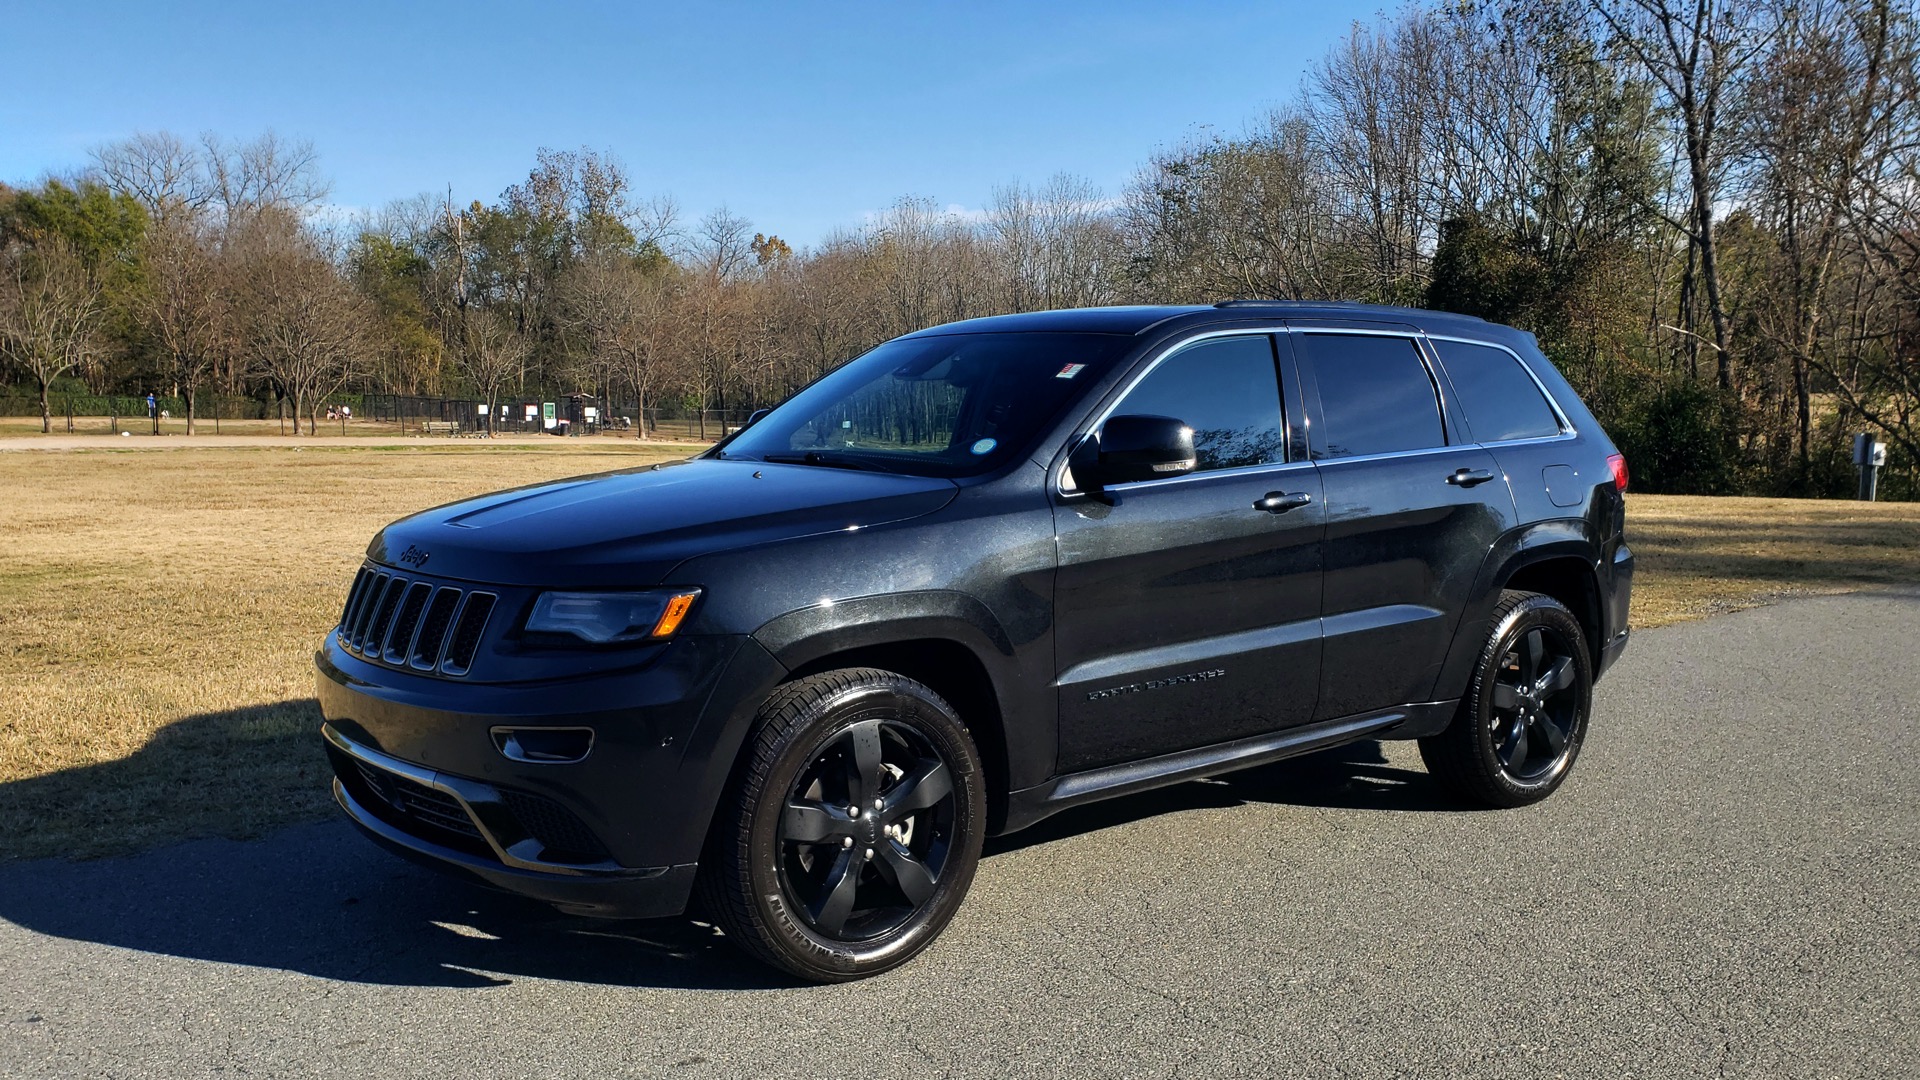 Used 2015 Jeep GRAND CHEROKEE HIGH ALTITUDE / NAV / SUNROOF / REARVIEW / TOW PKG for sale Sold at Formula Imports in Charlotte NC 28227 1